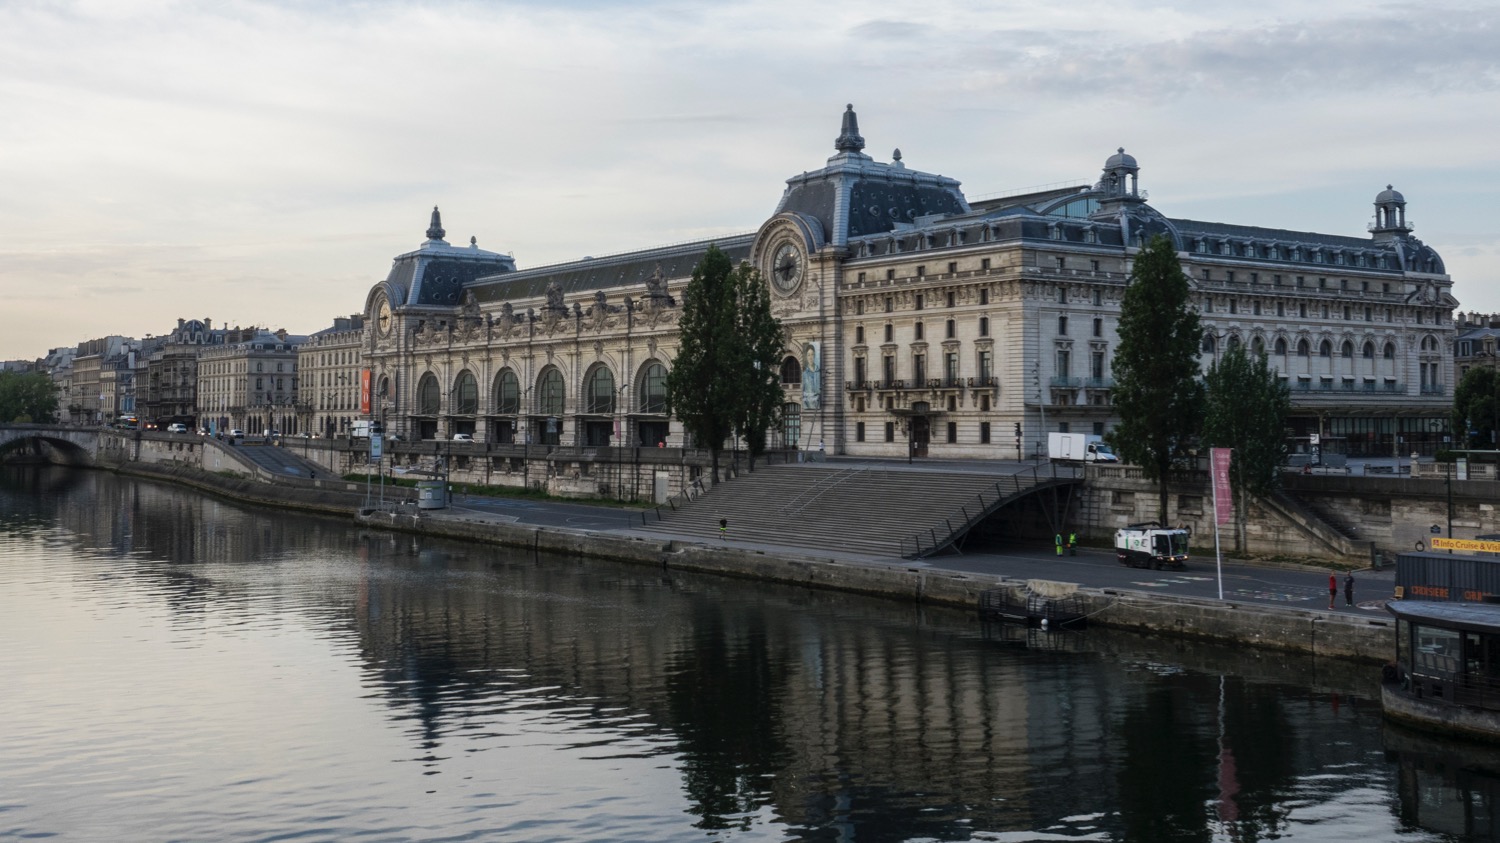 One of my favorite art galleries, the Musee D'Orsay 